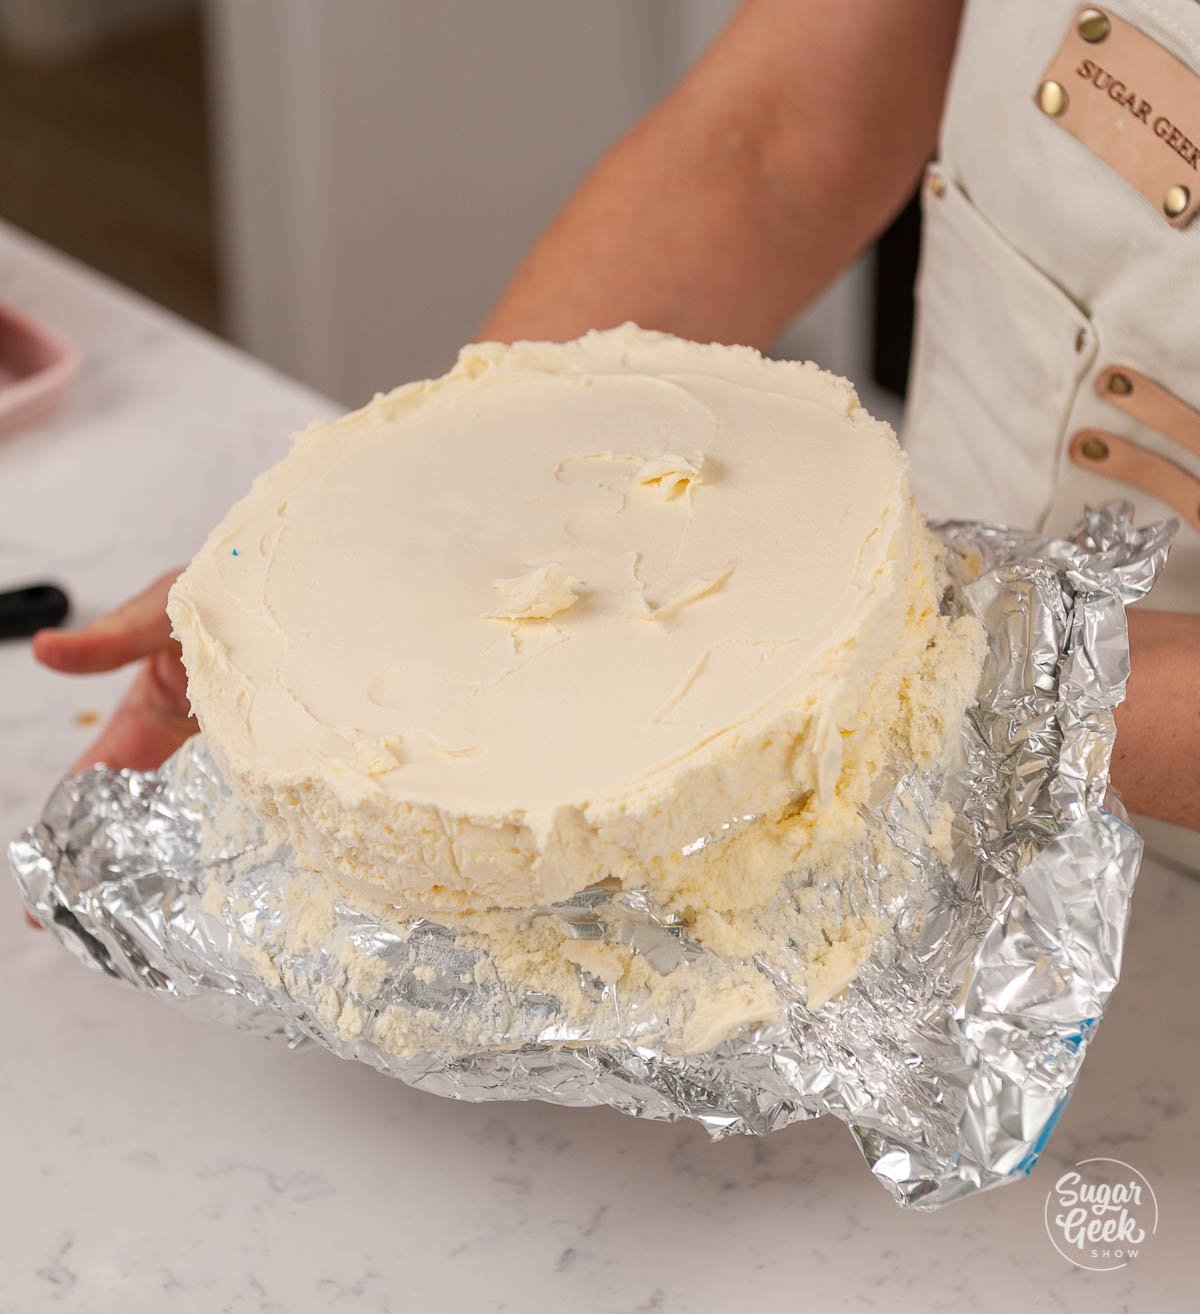 unwrapping ice cream cake layer from aluminum foil